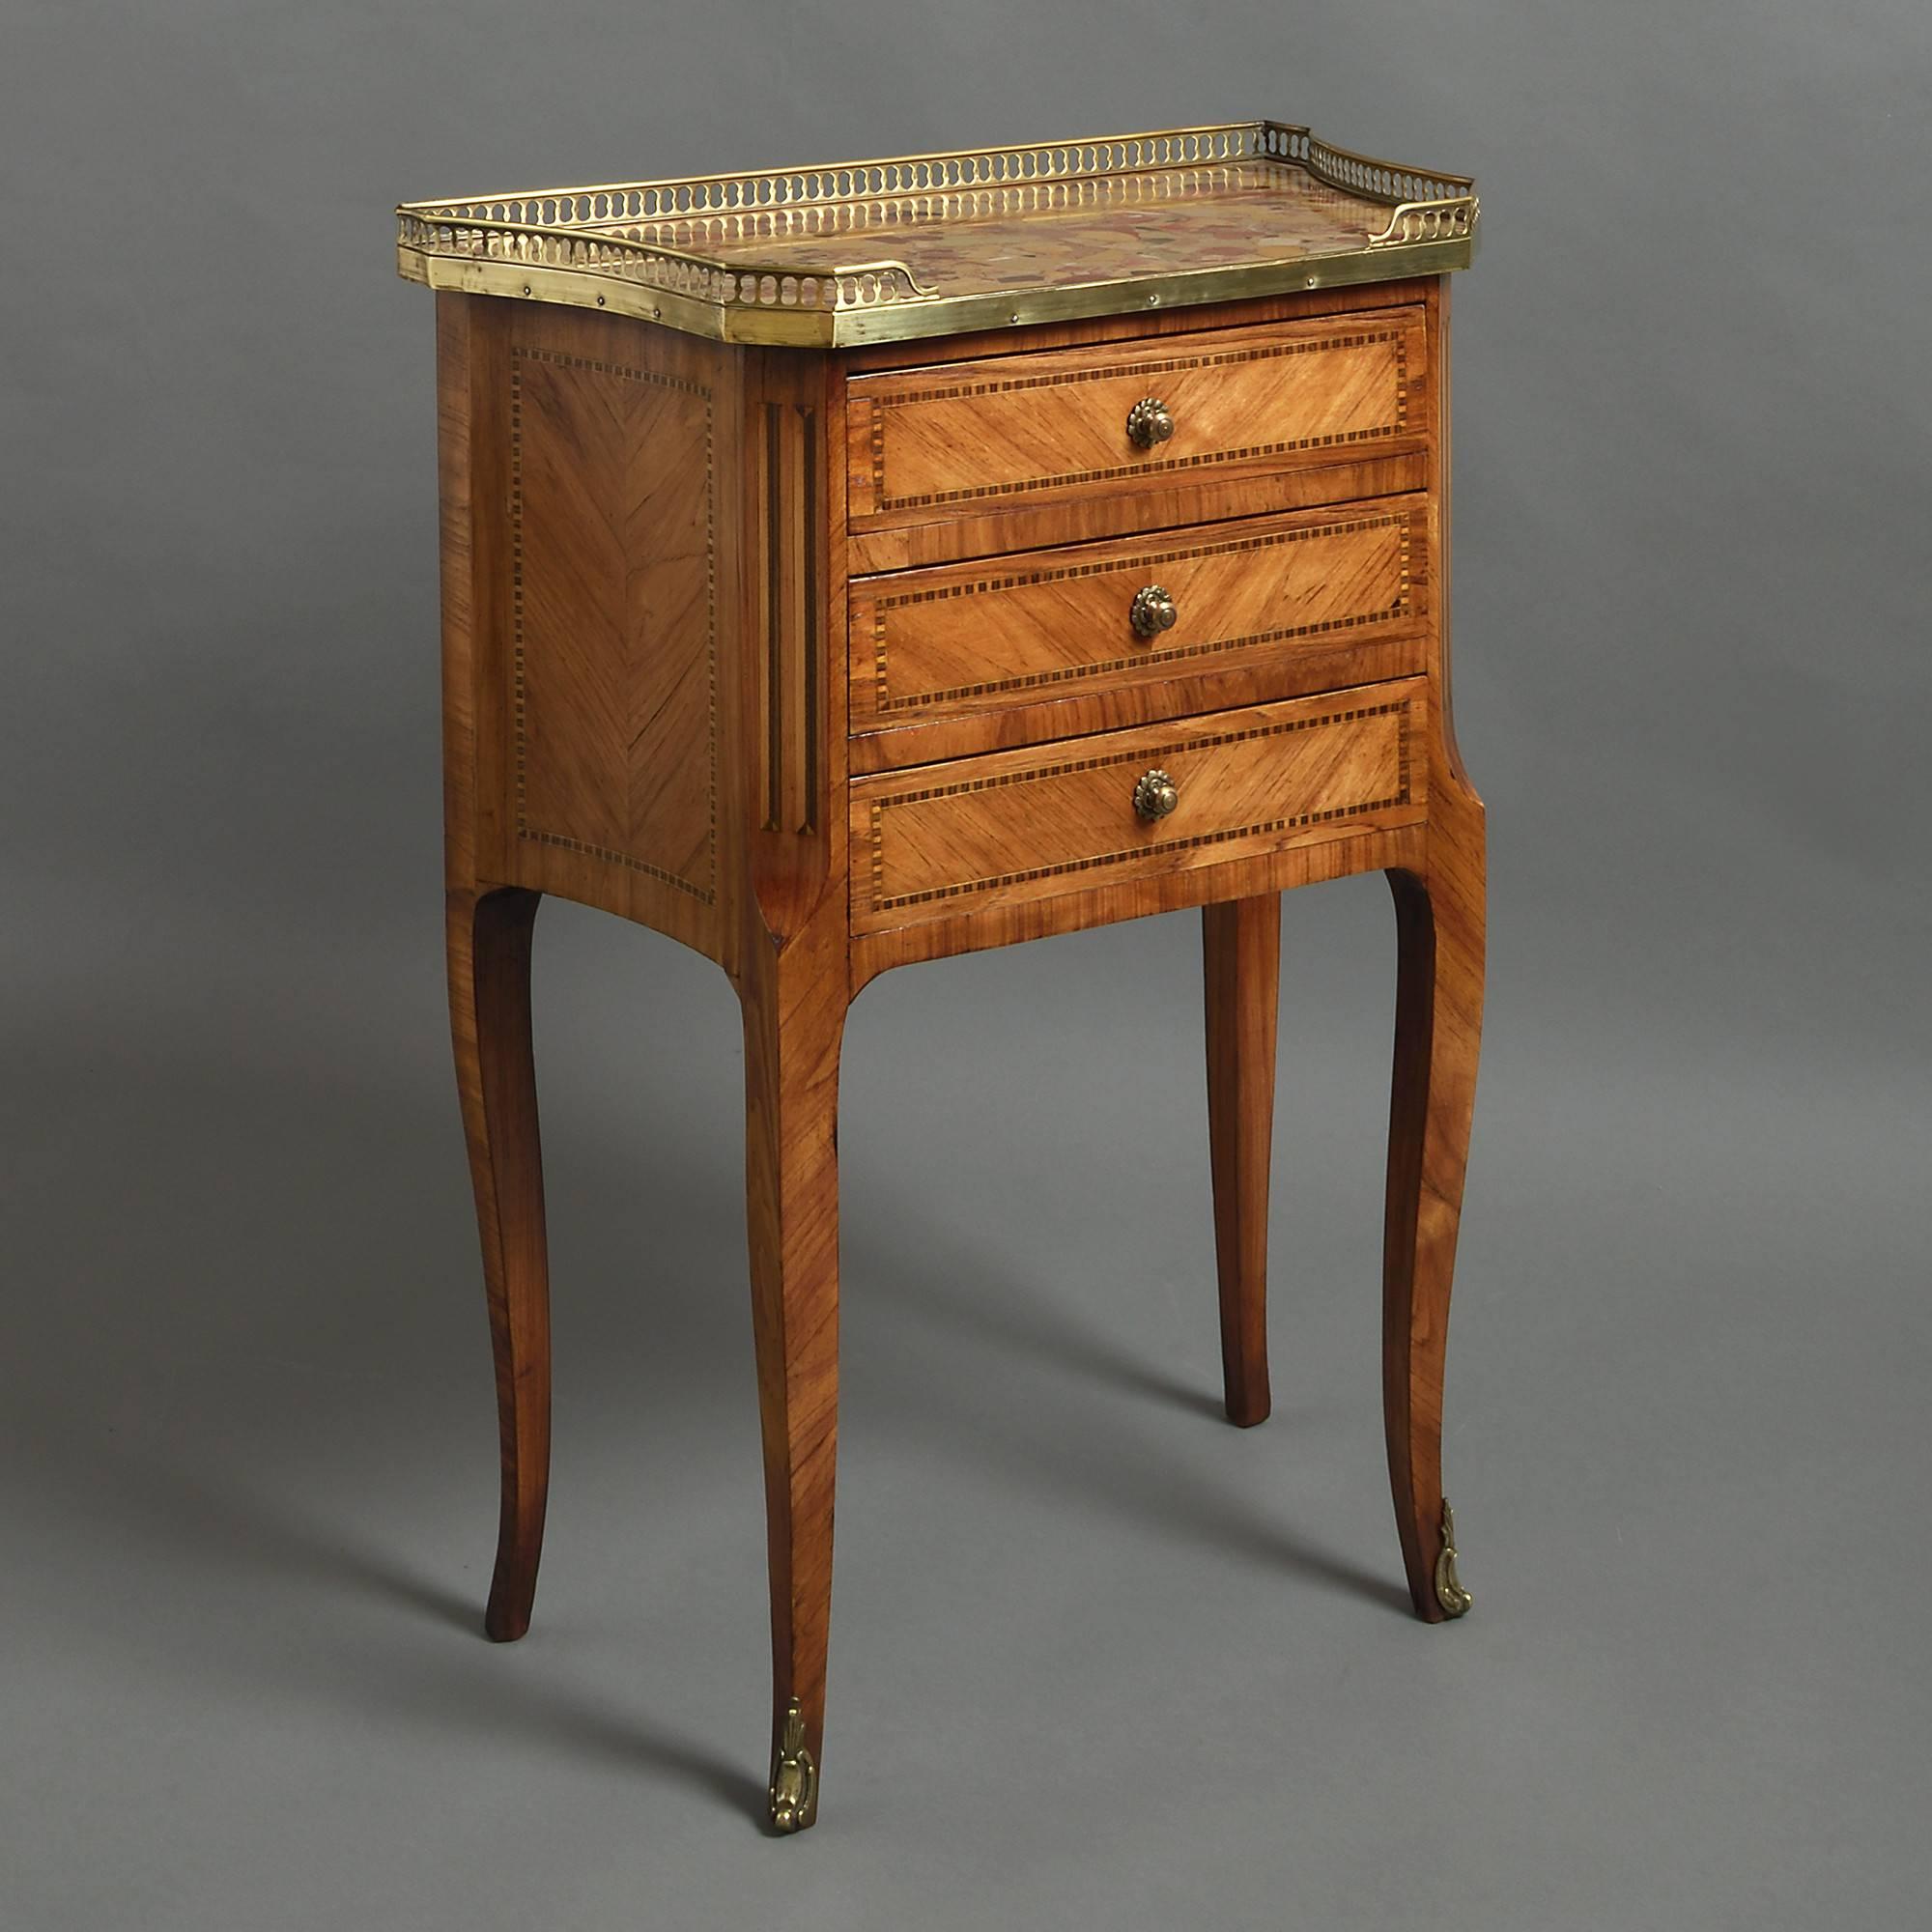 A fine pair of kingwood parquetry bedside cabinets, each having an inset marble top with pierced brass gallery, above three drawers with finely chased brass knobs and raised upon shaped legs with brass mounts.